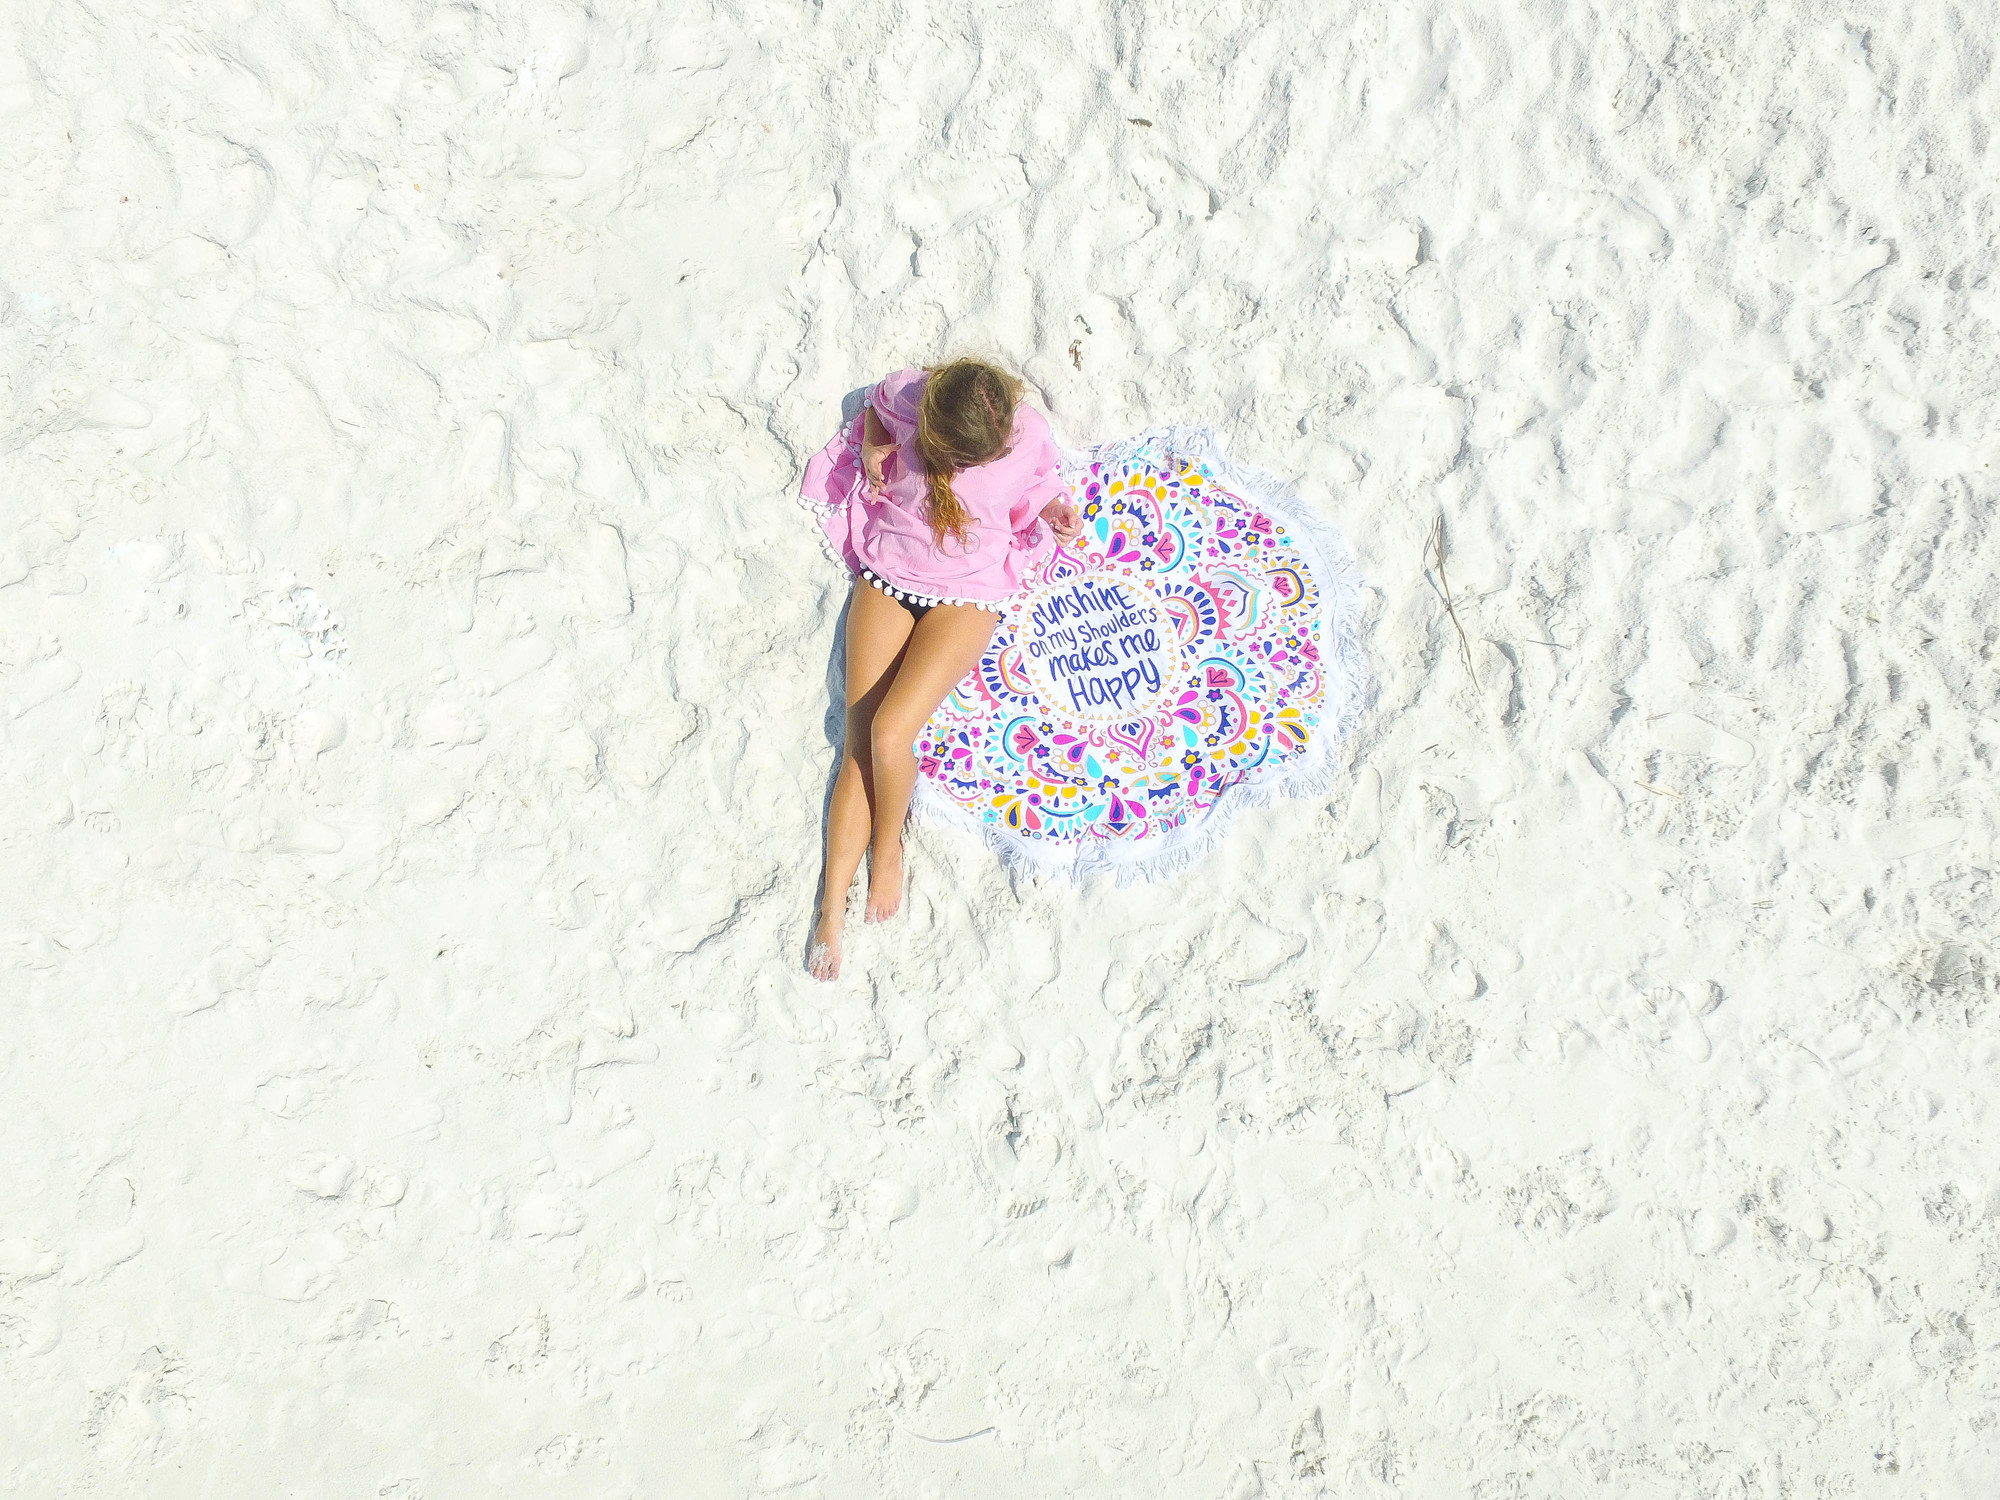 Sunshine on My Shoulders Makes Me Happy beach pom pom cover up OOTD dji phantom 3 drone picture by lauren lindmark on daily dose of charm